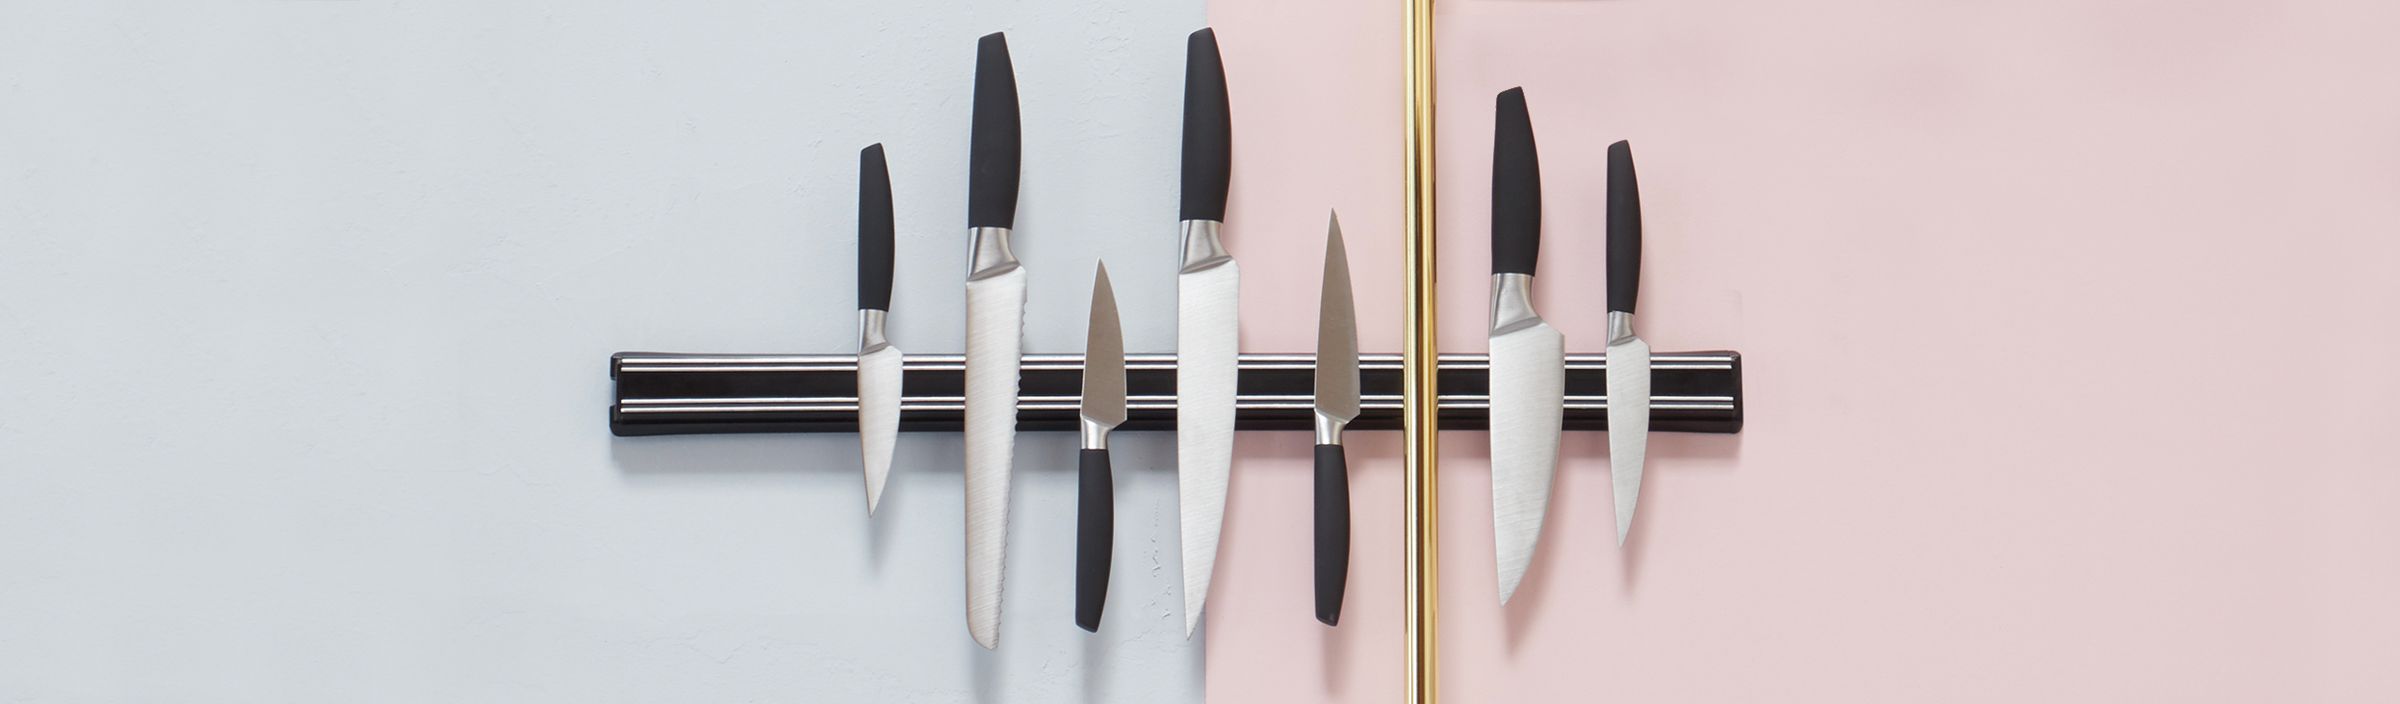 BUYING GUIDE KITCHEN KNIVES 